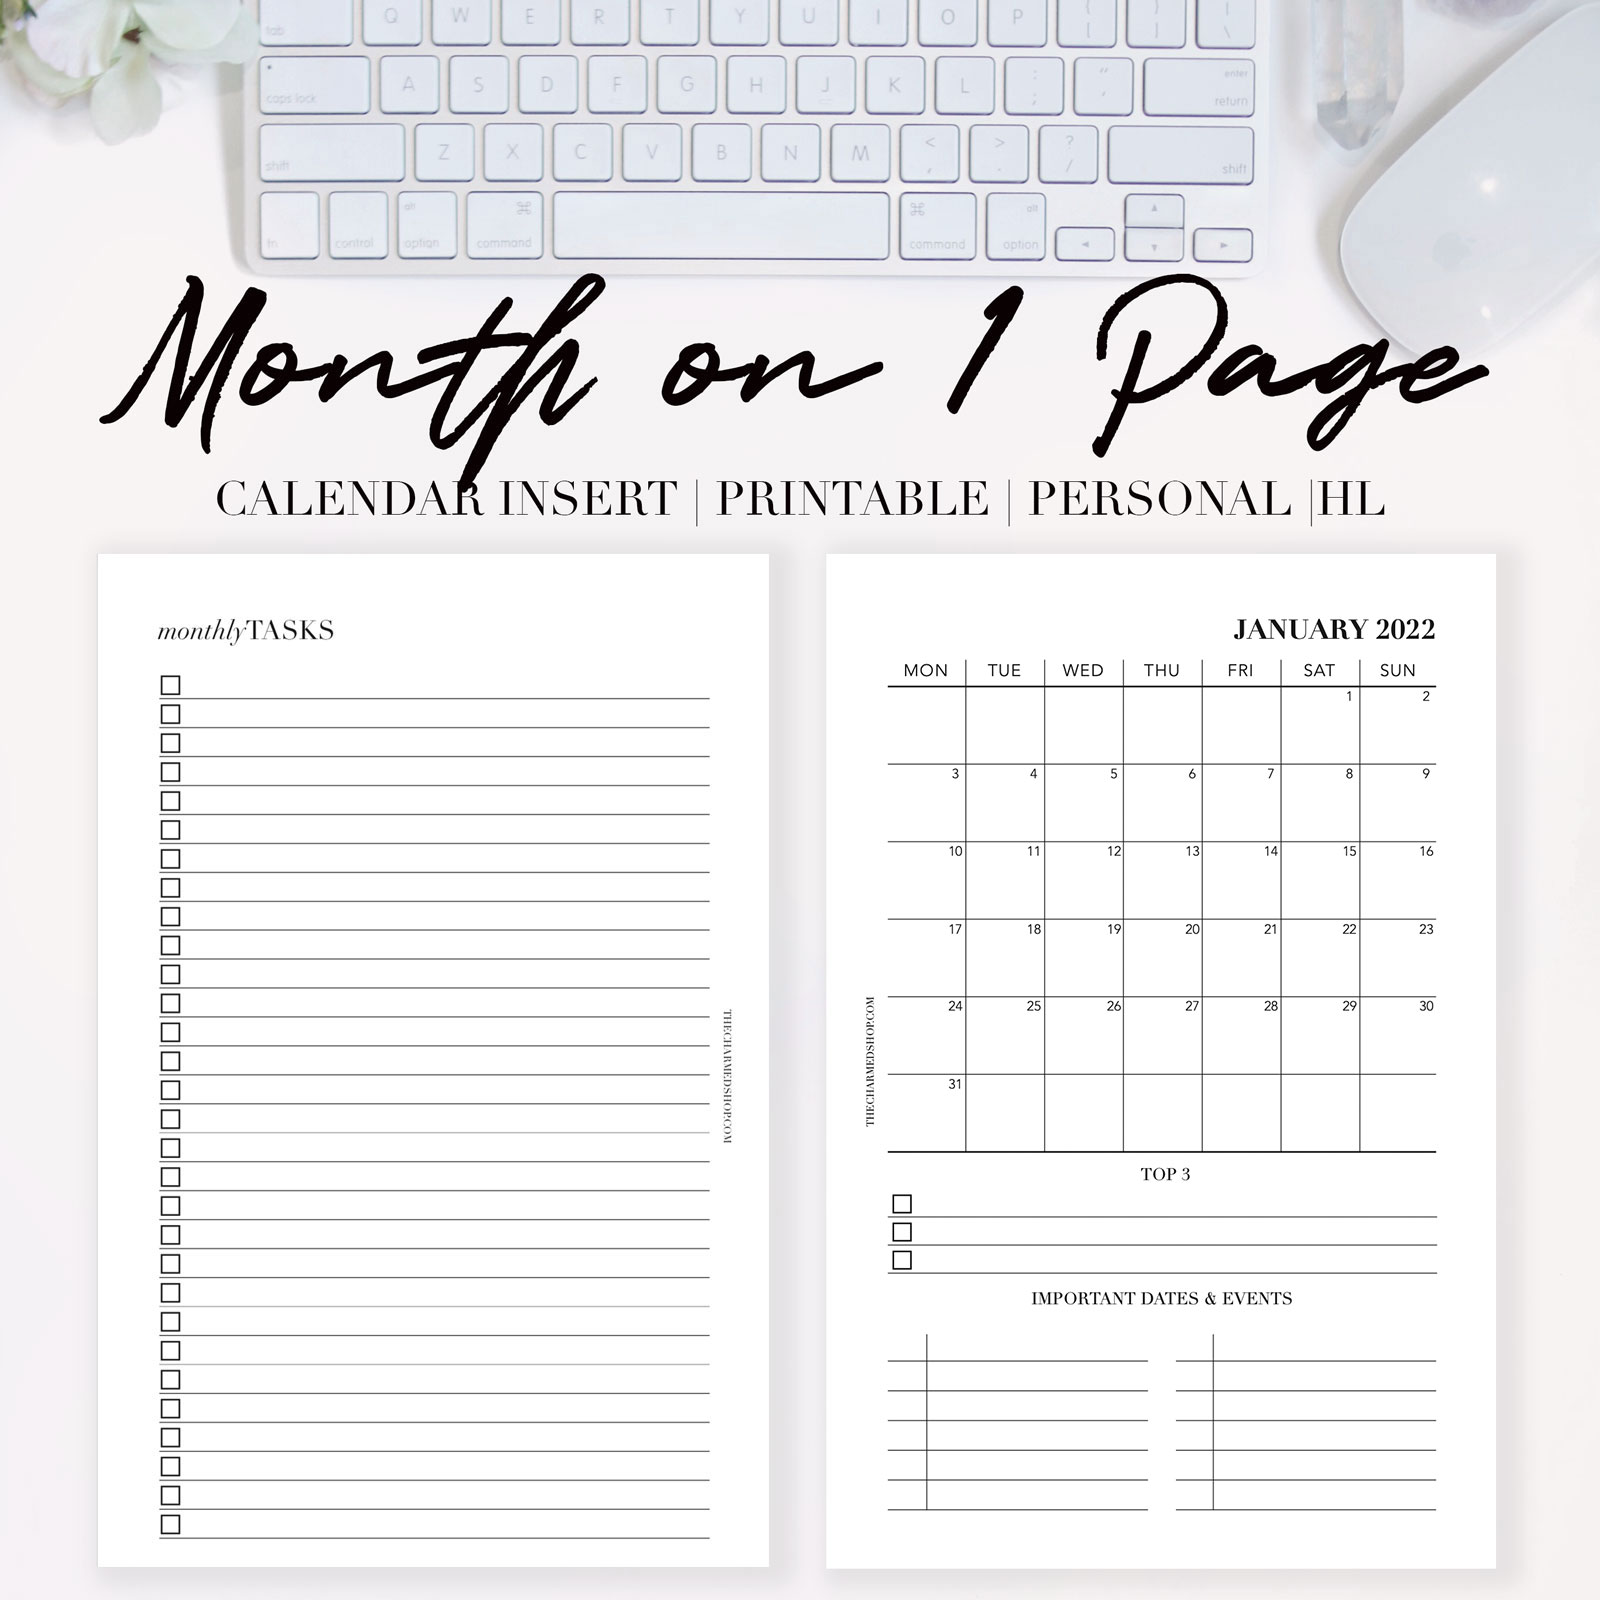 2022-month-on-one-page-calendar-printable-pdf-the-2022-calendar-with-federal-holidays-jeremy